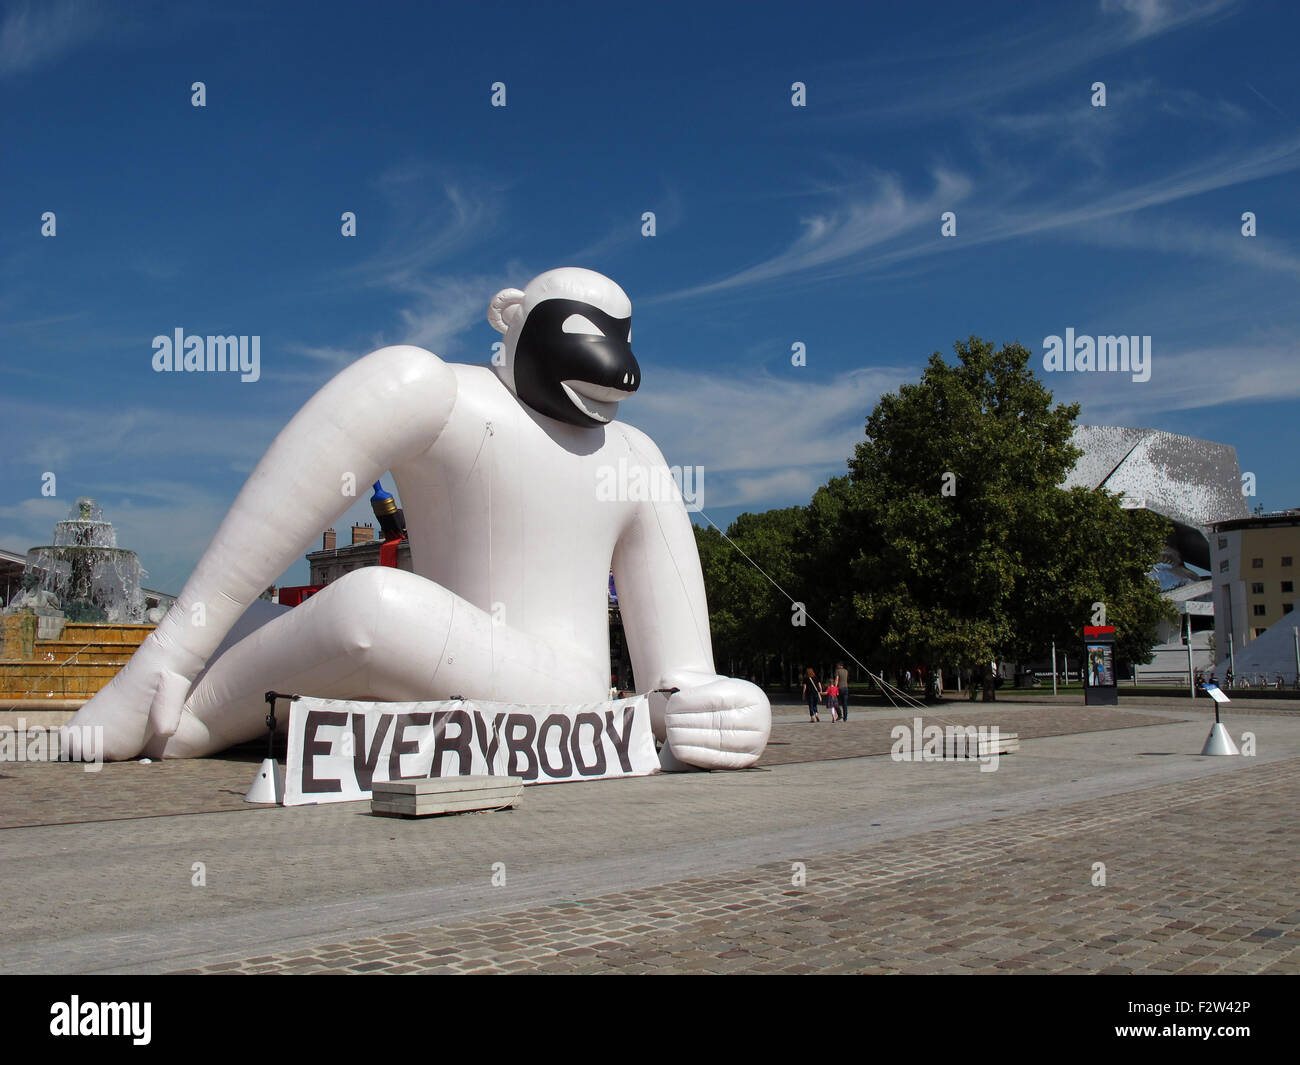 Everybody-2007,Everybody always thinks they are by Stefan Sagmeister-USA,right,L'Air des Geants,The Giants Air,exhibition,Paris Stock Photo